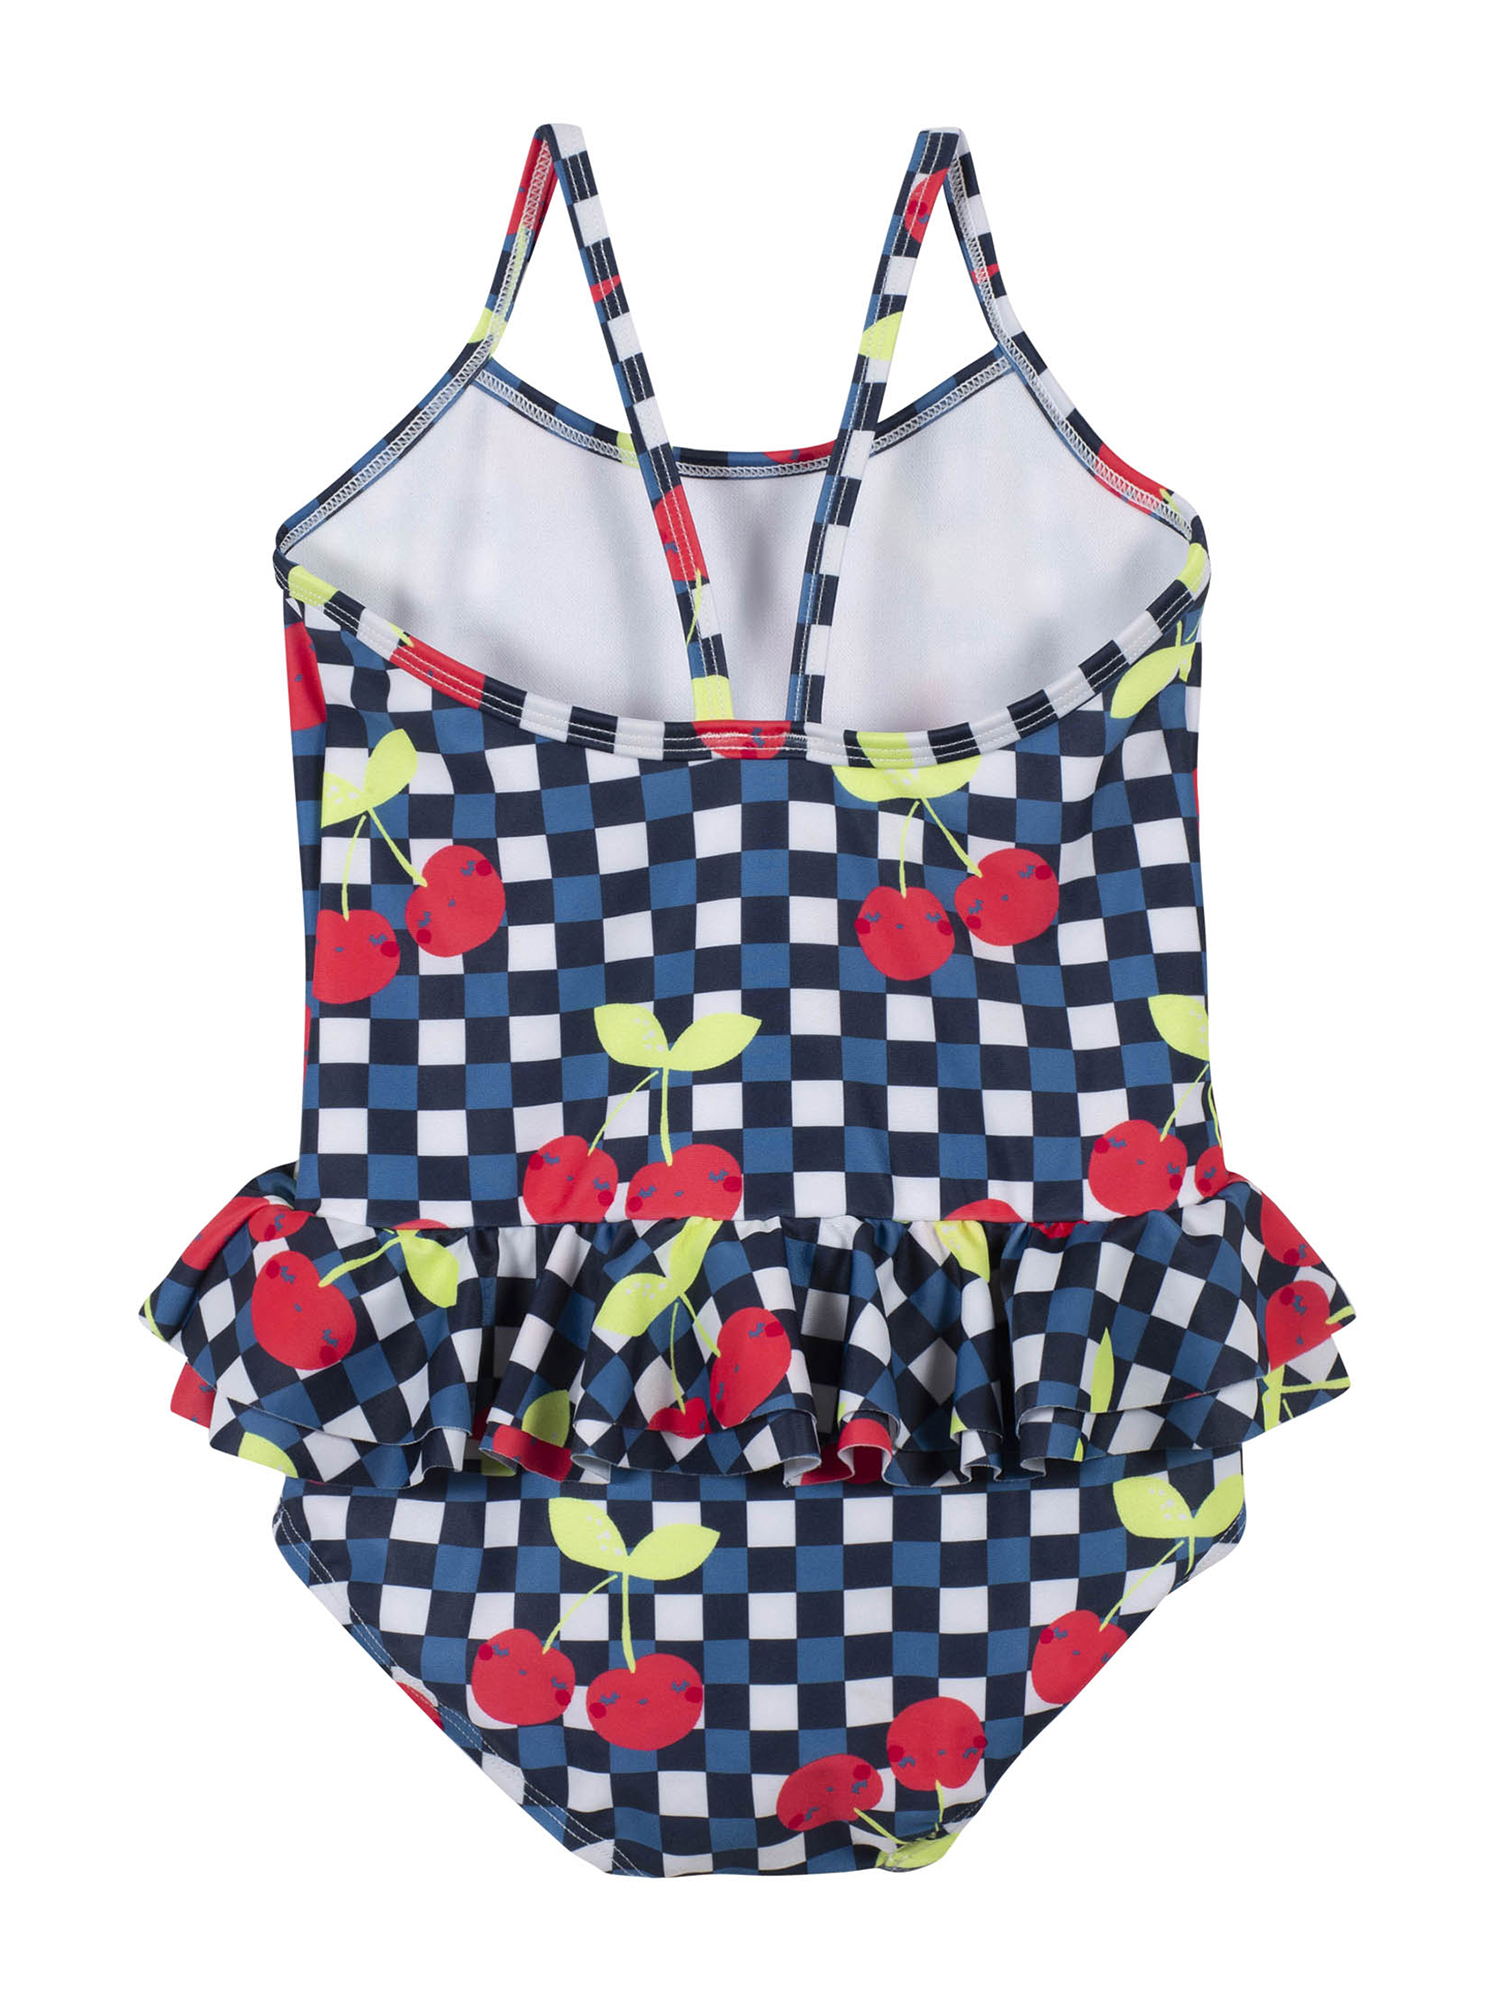 Gerber Baby Toddler Girl One-Piece Swimsuit - image 3 of 7